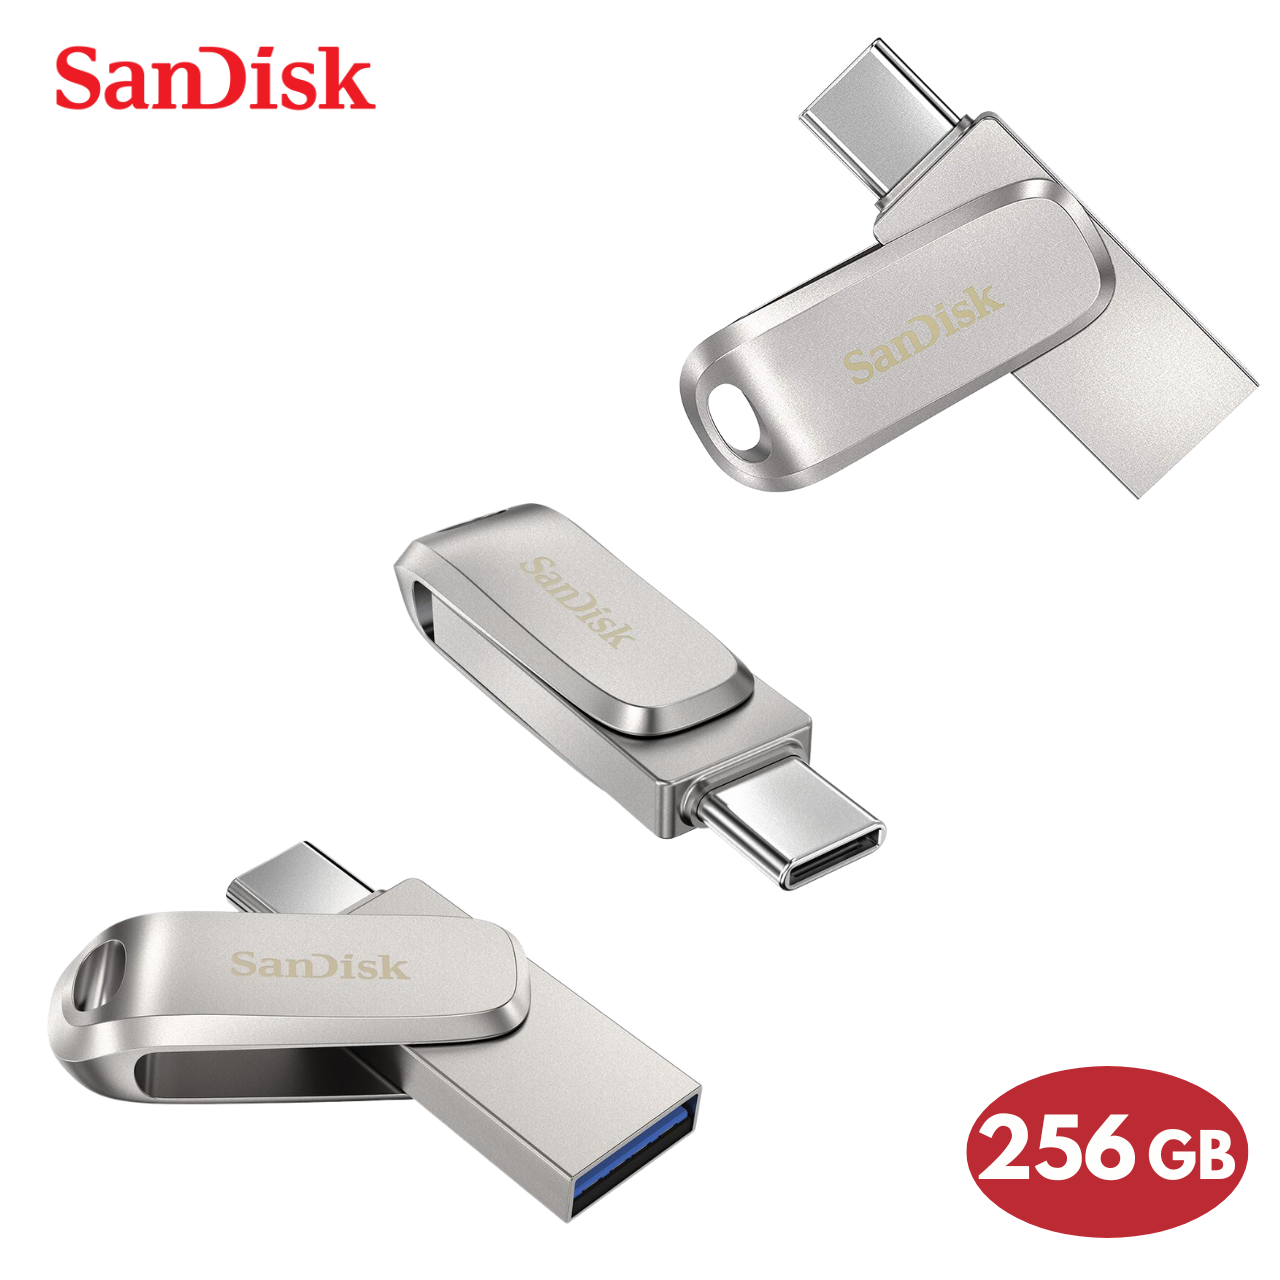 SanDisk Ultra Dual Drive Luxe USB Type-C 256GB Flash Drive for